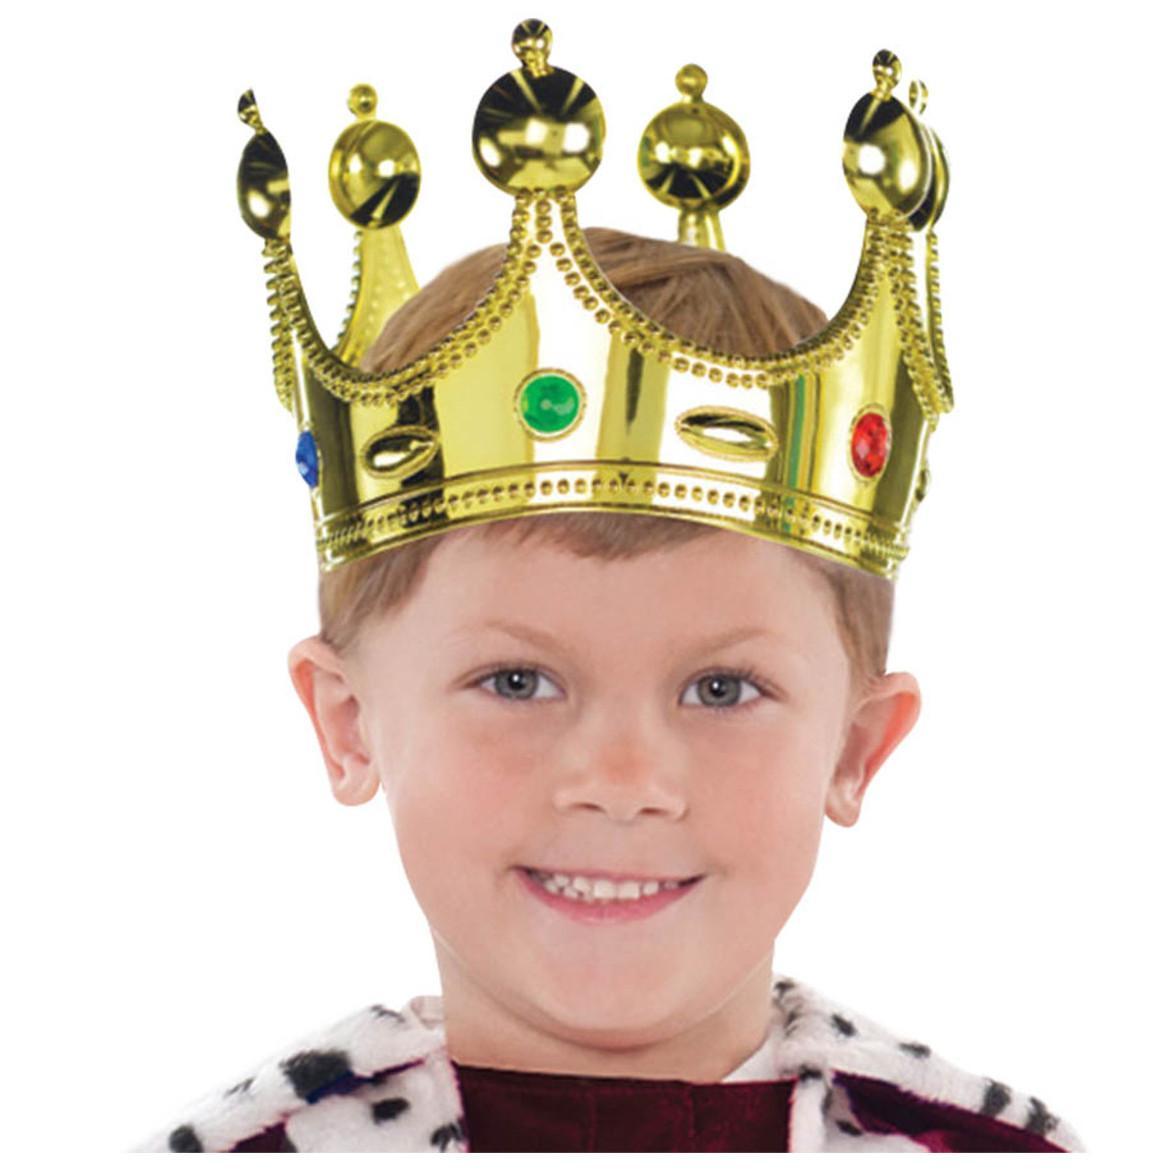 Jeweled Crown-Child Costumes & Apparel - Party Centre - Party Centre